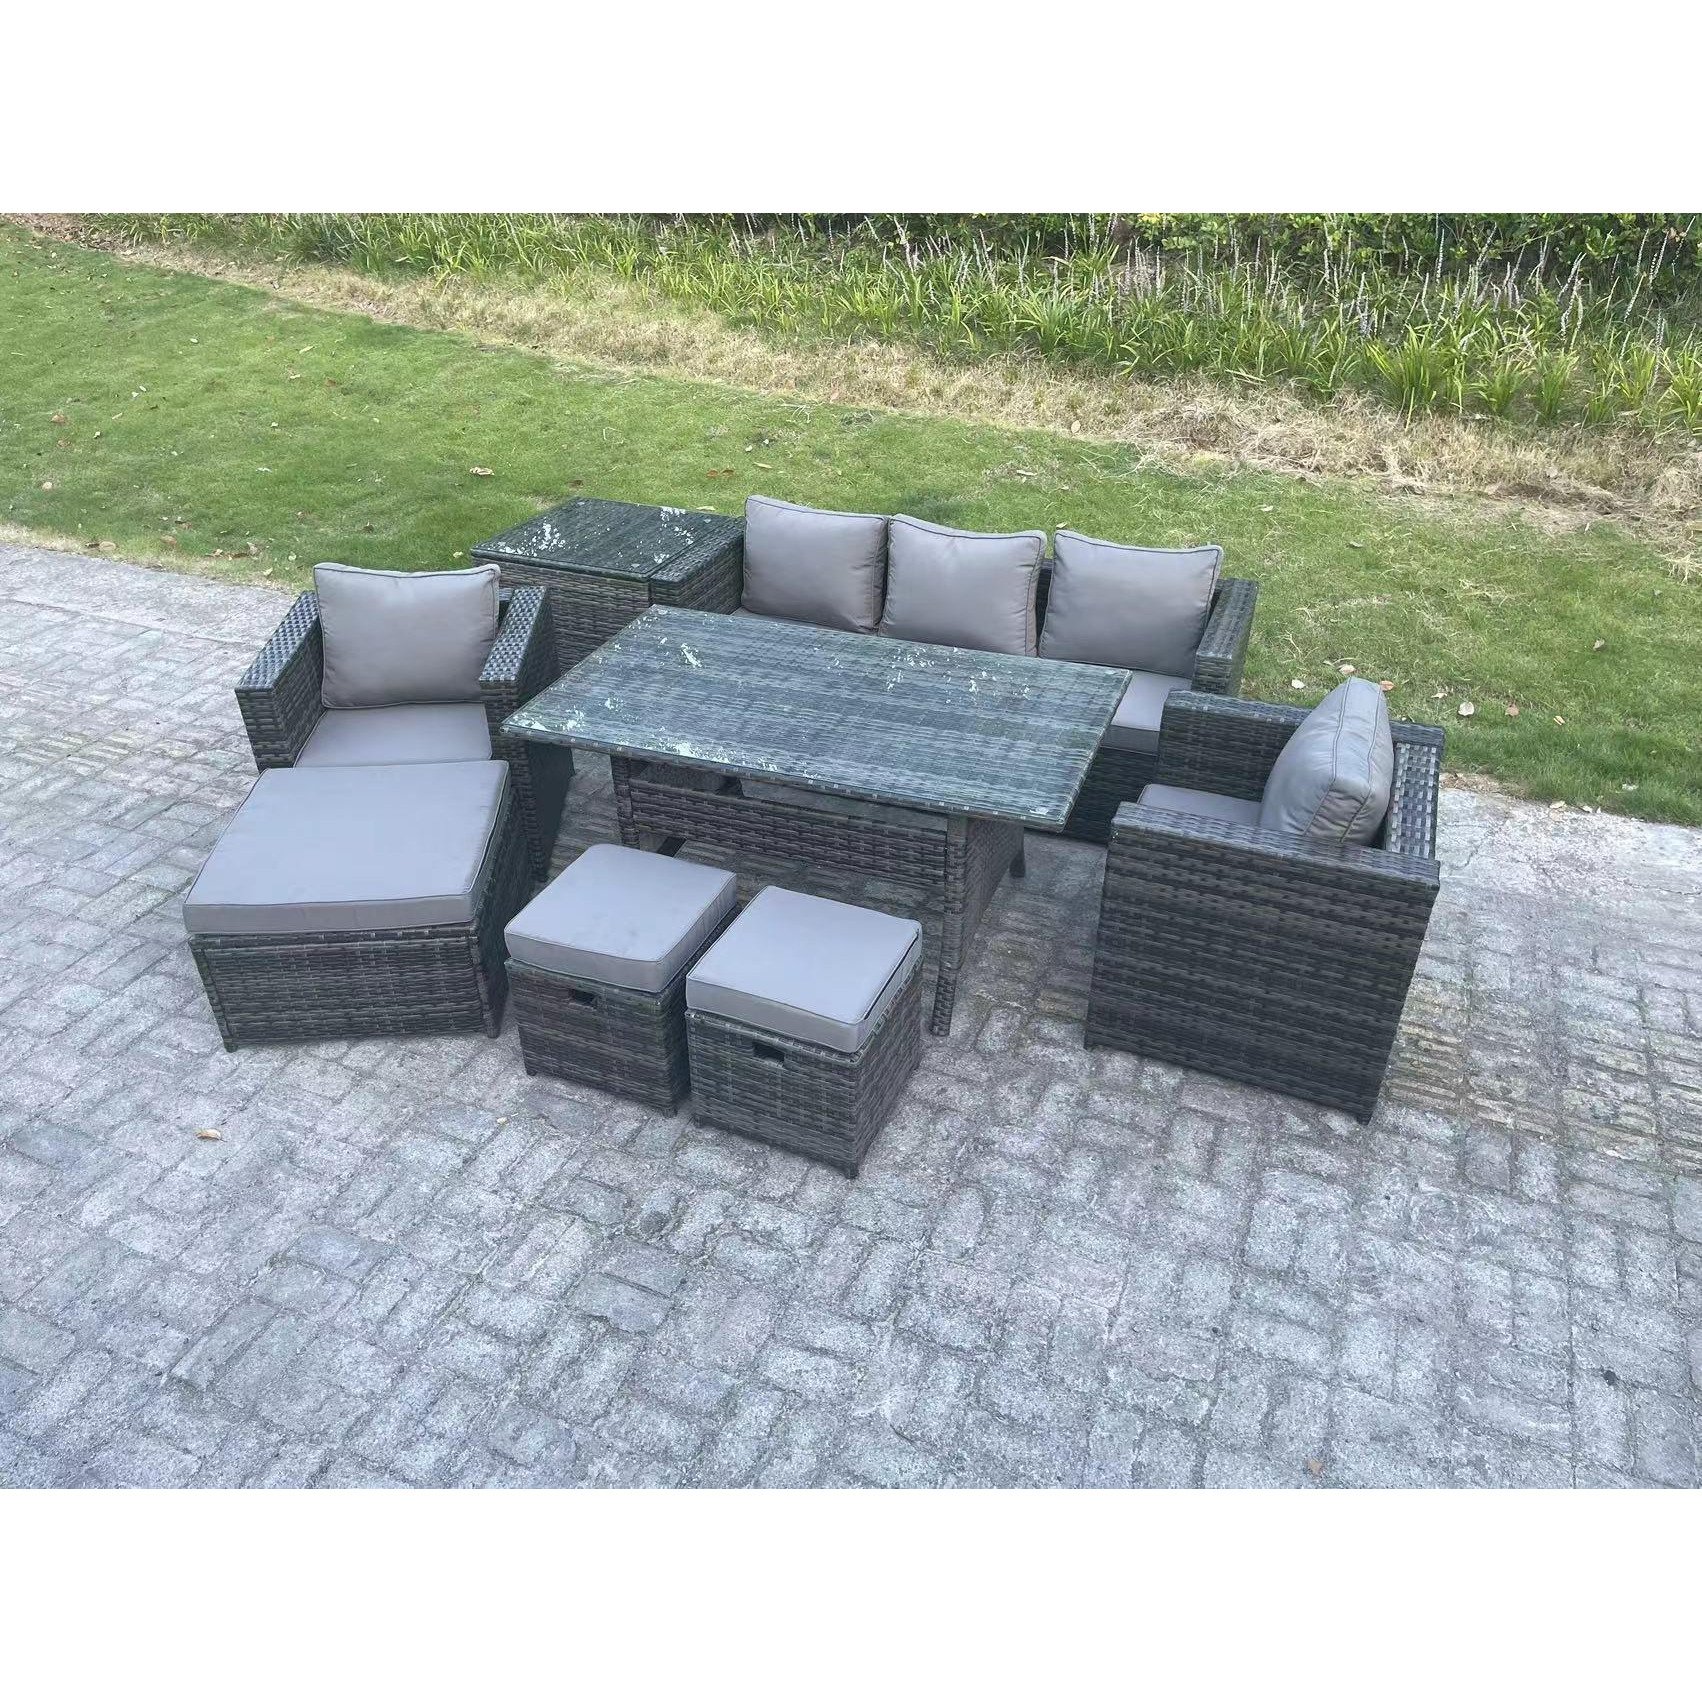 8 Seater Outdoor Garden Furniture Set Patio Rattan  Dining Table Lounge Sofa Chair  Footstool - image 1